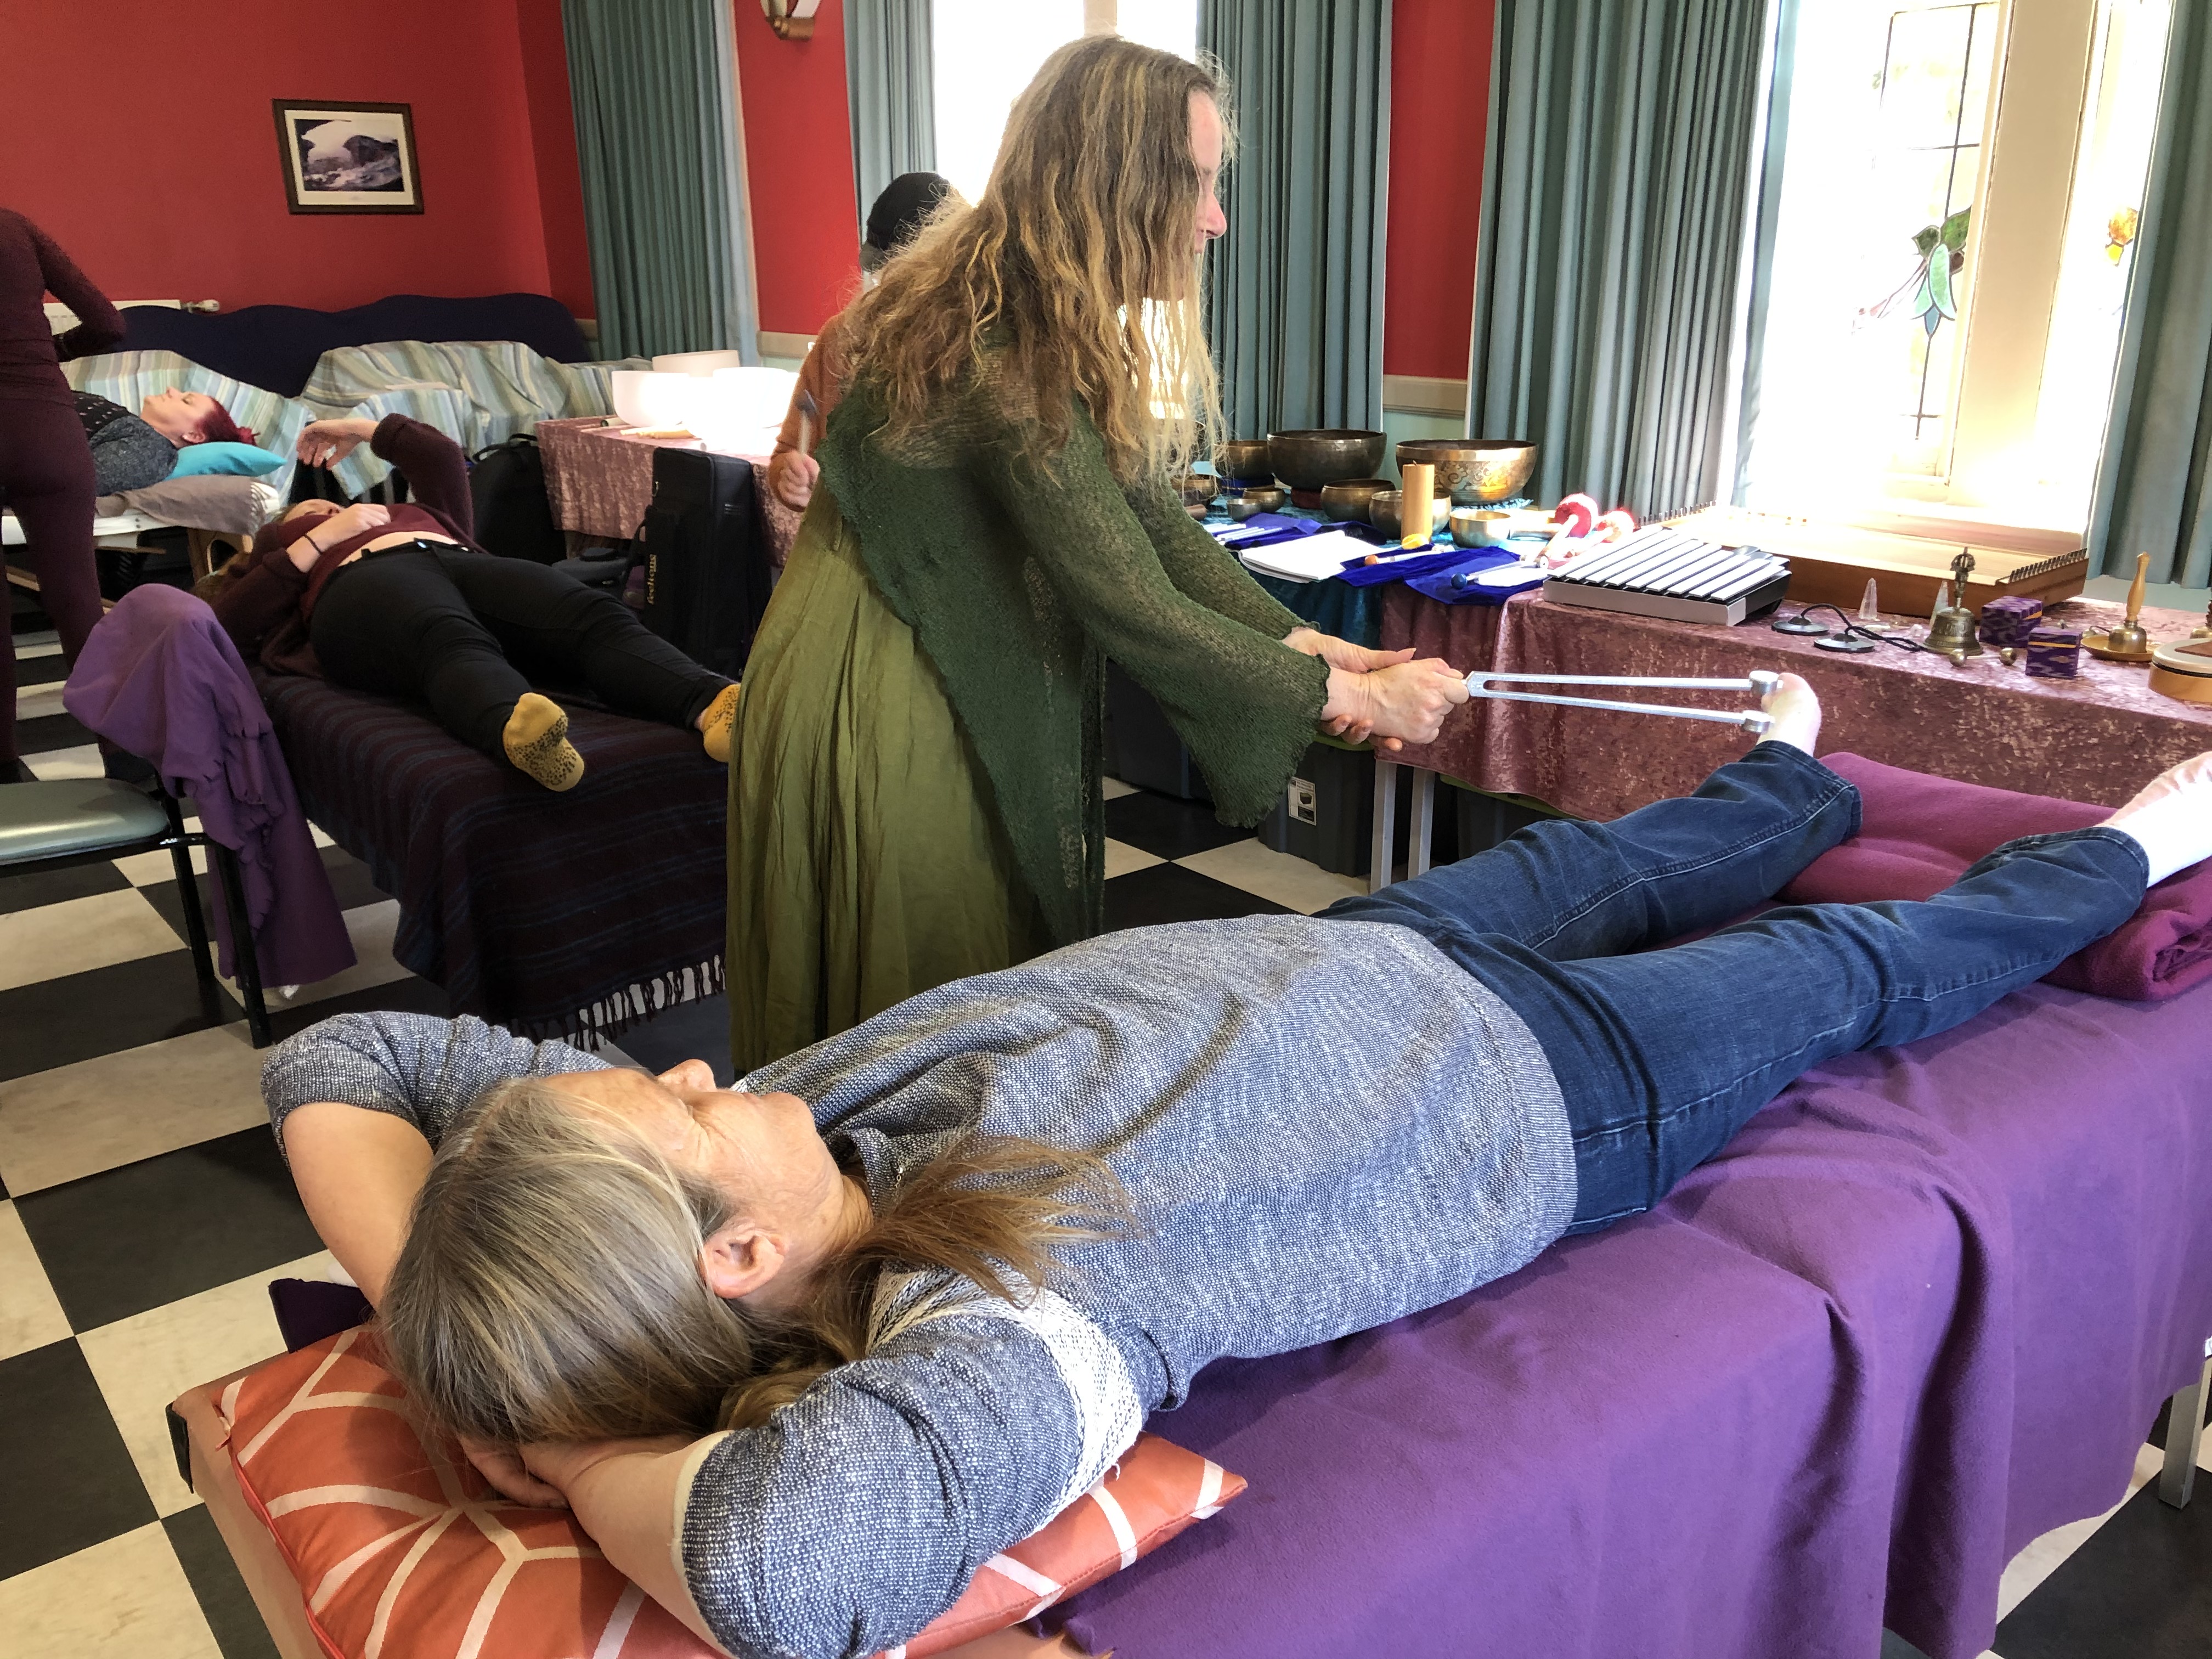 MALENY, QLD - Sound Healing with Tuning Forks: 2 Days (Maleny, Australia)